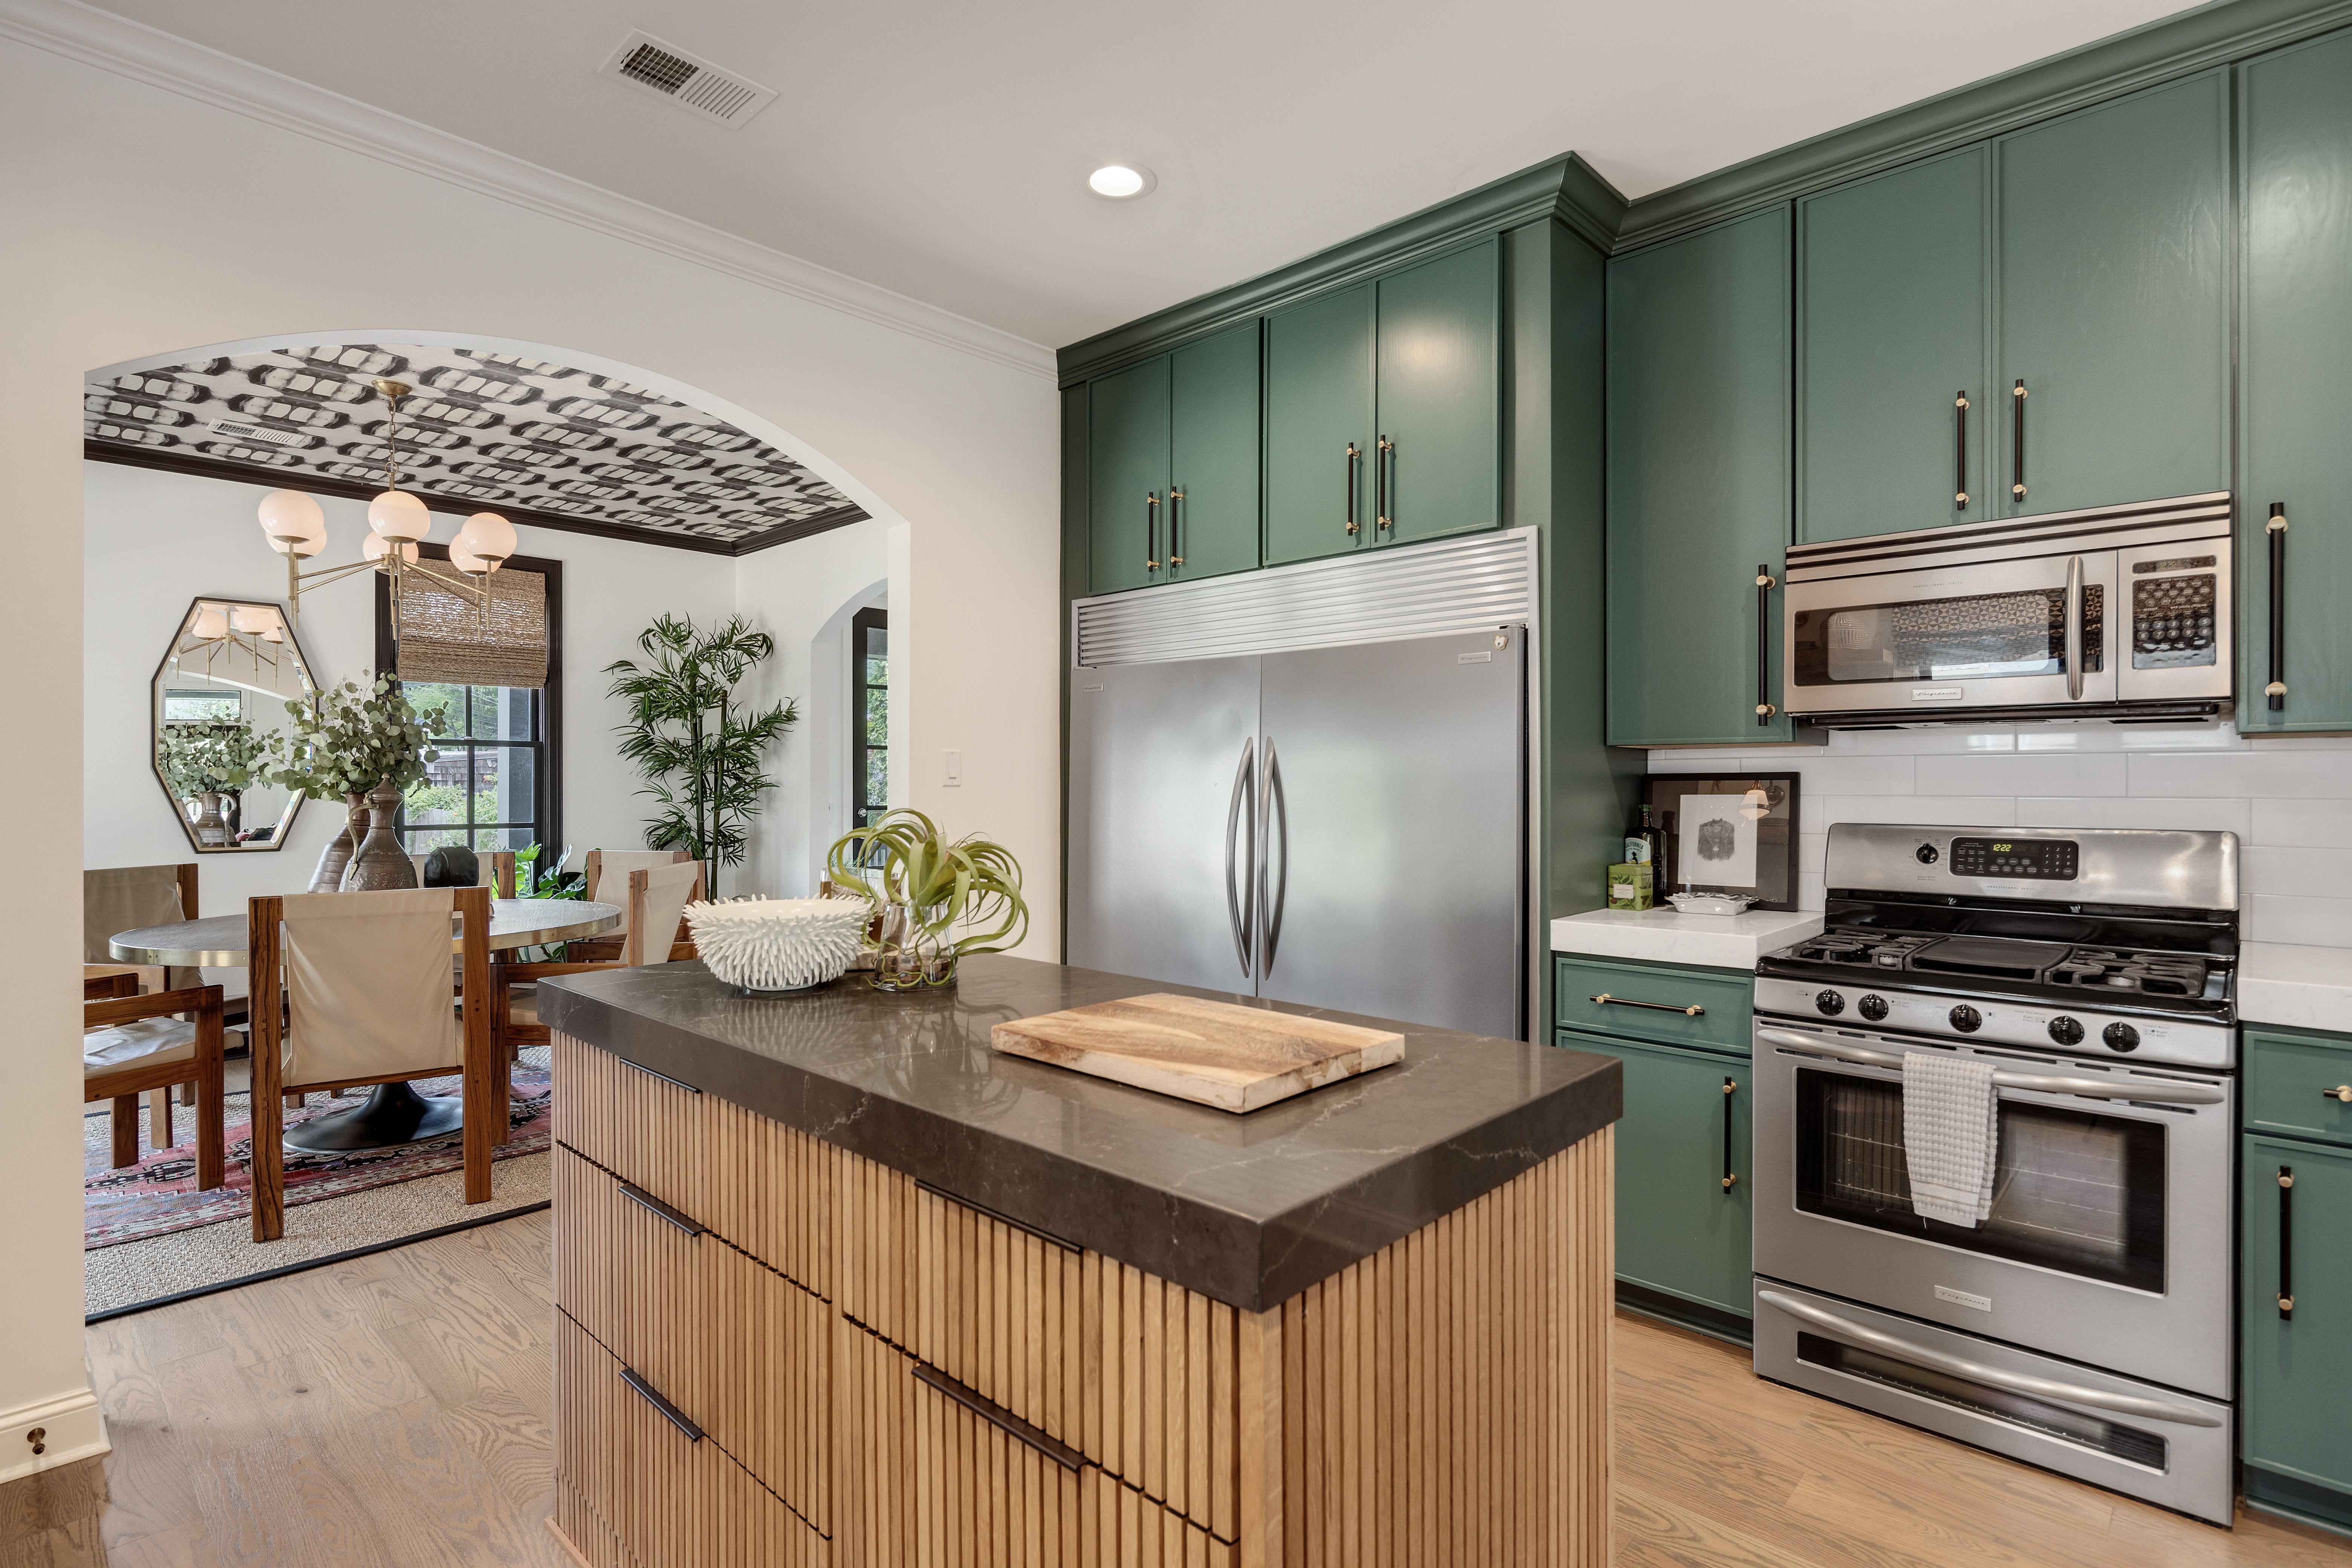 21 Sage Green Kitchens That Are Trendy and Timeless